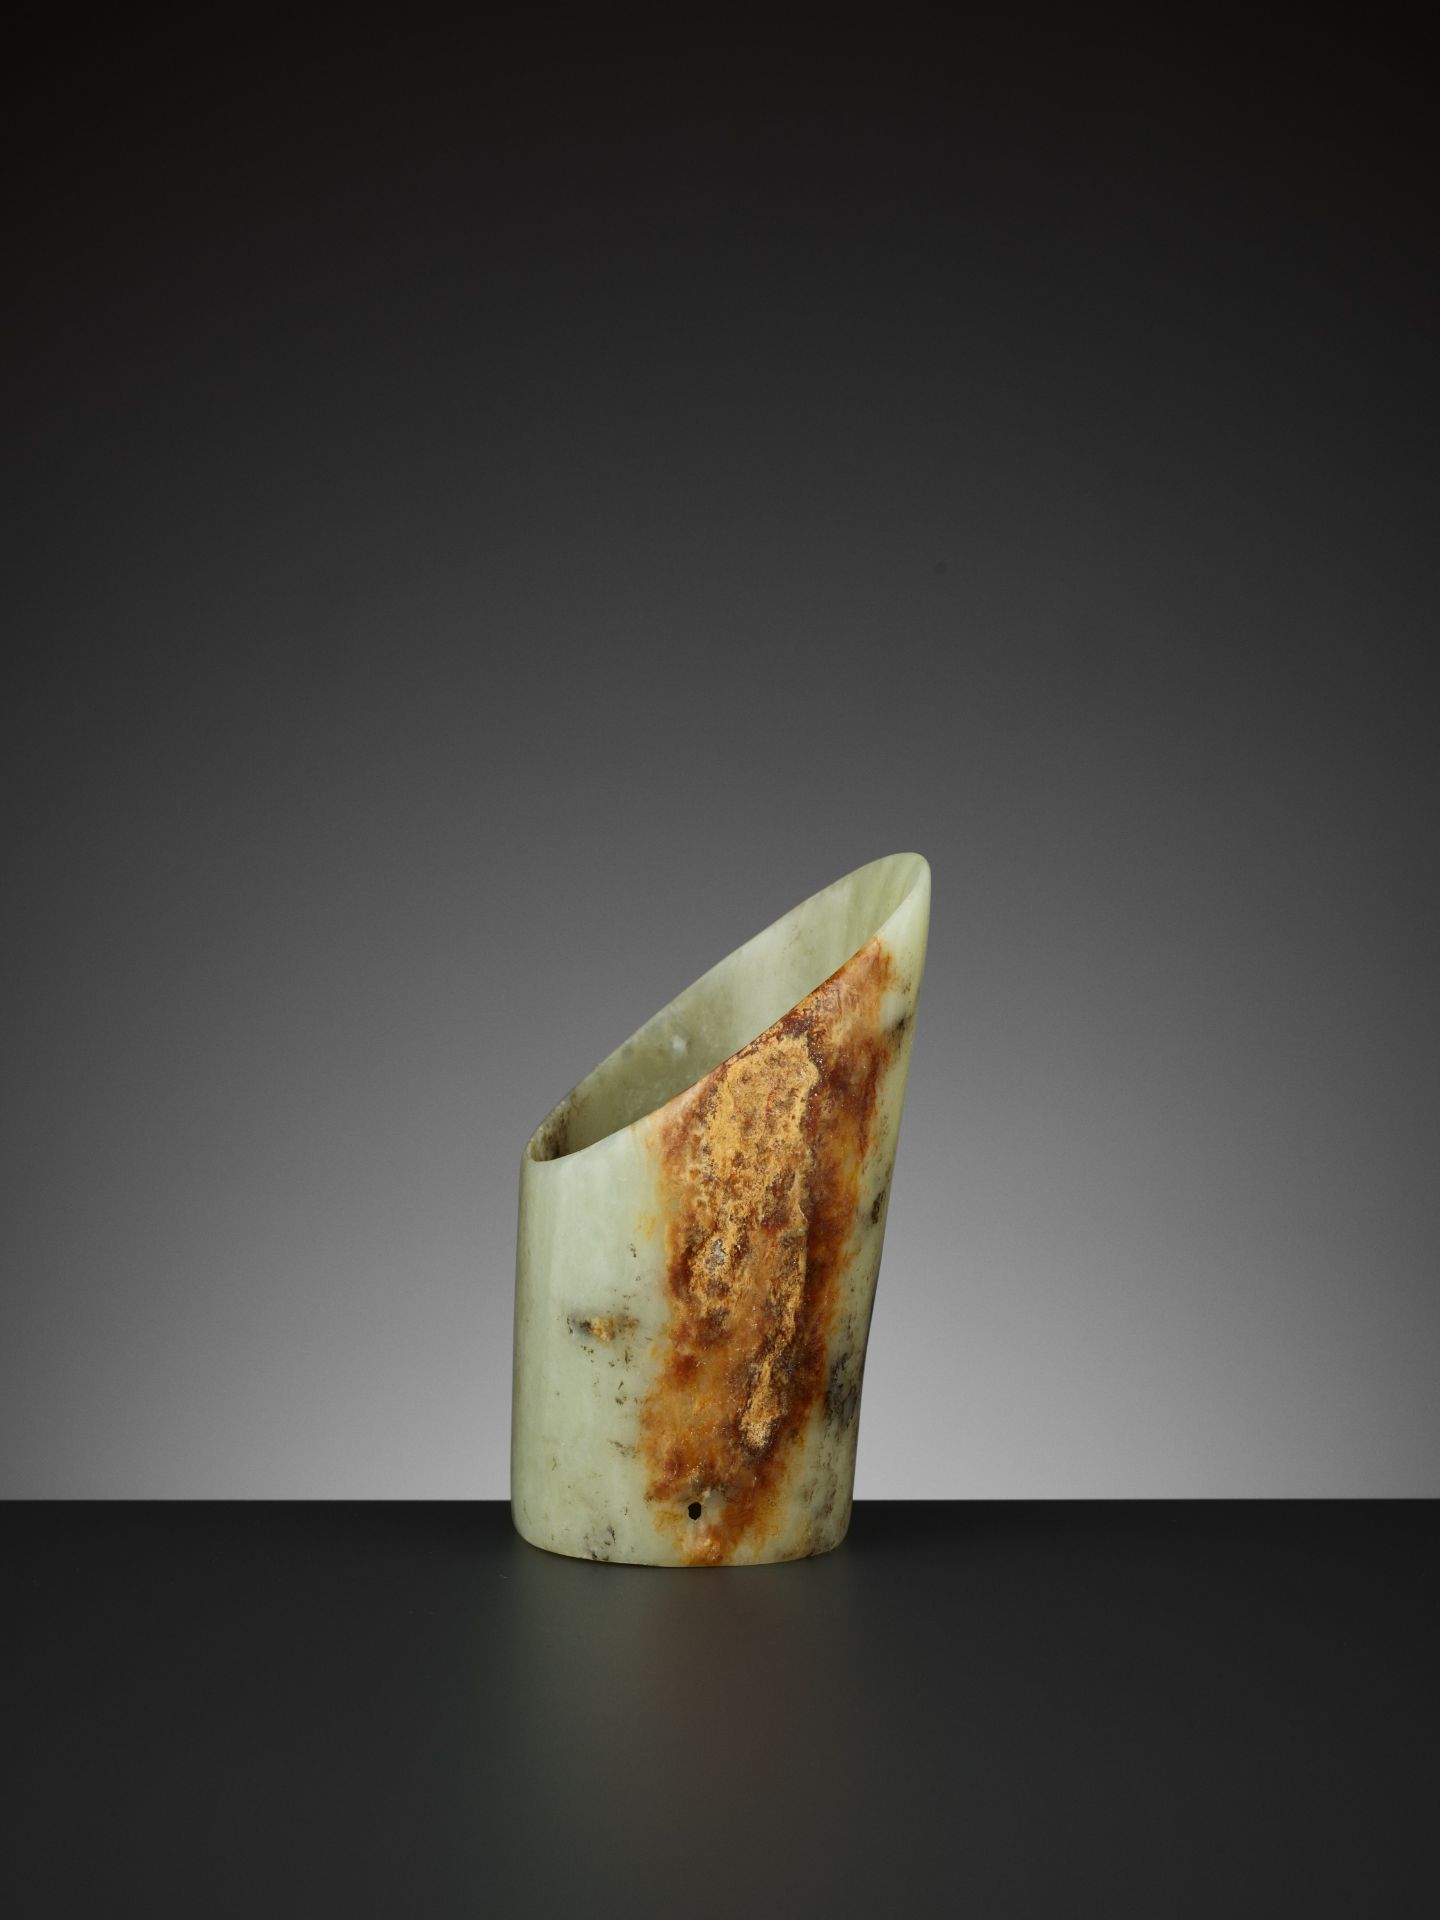 A PALE YELLOW AND RUSSET JADE HOOF-SHAPED ORNAMENT, HONGSHAN - Image 5 of 13